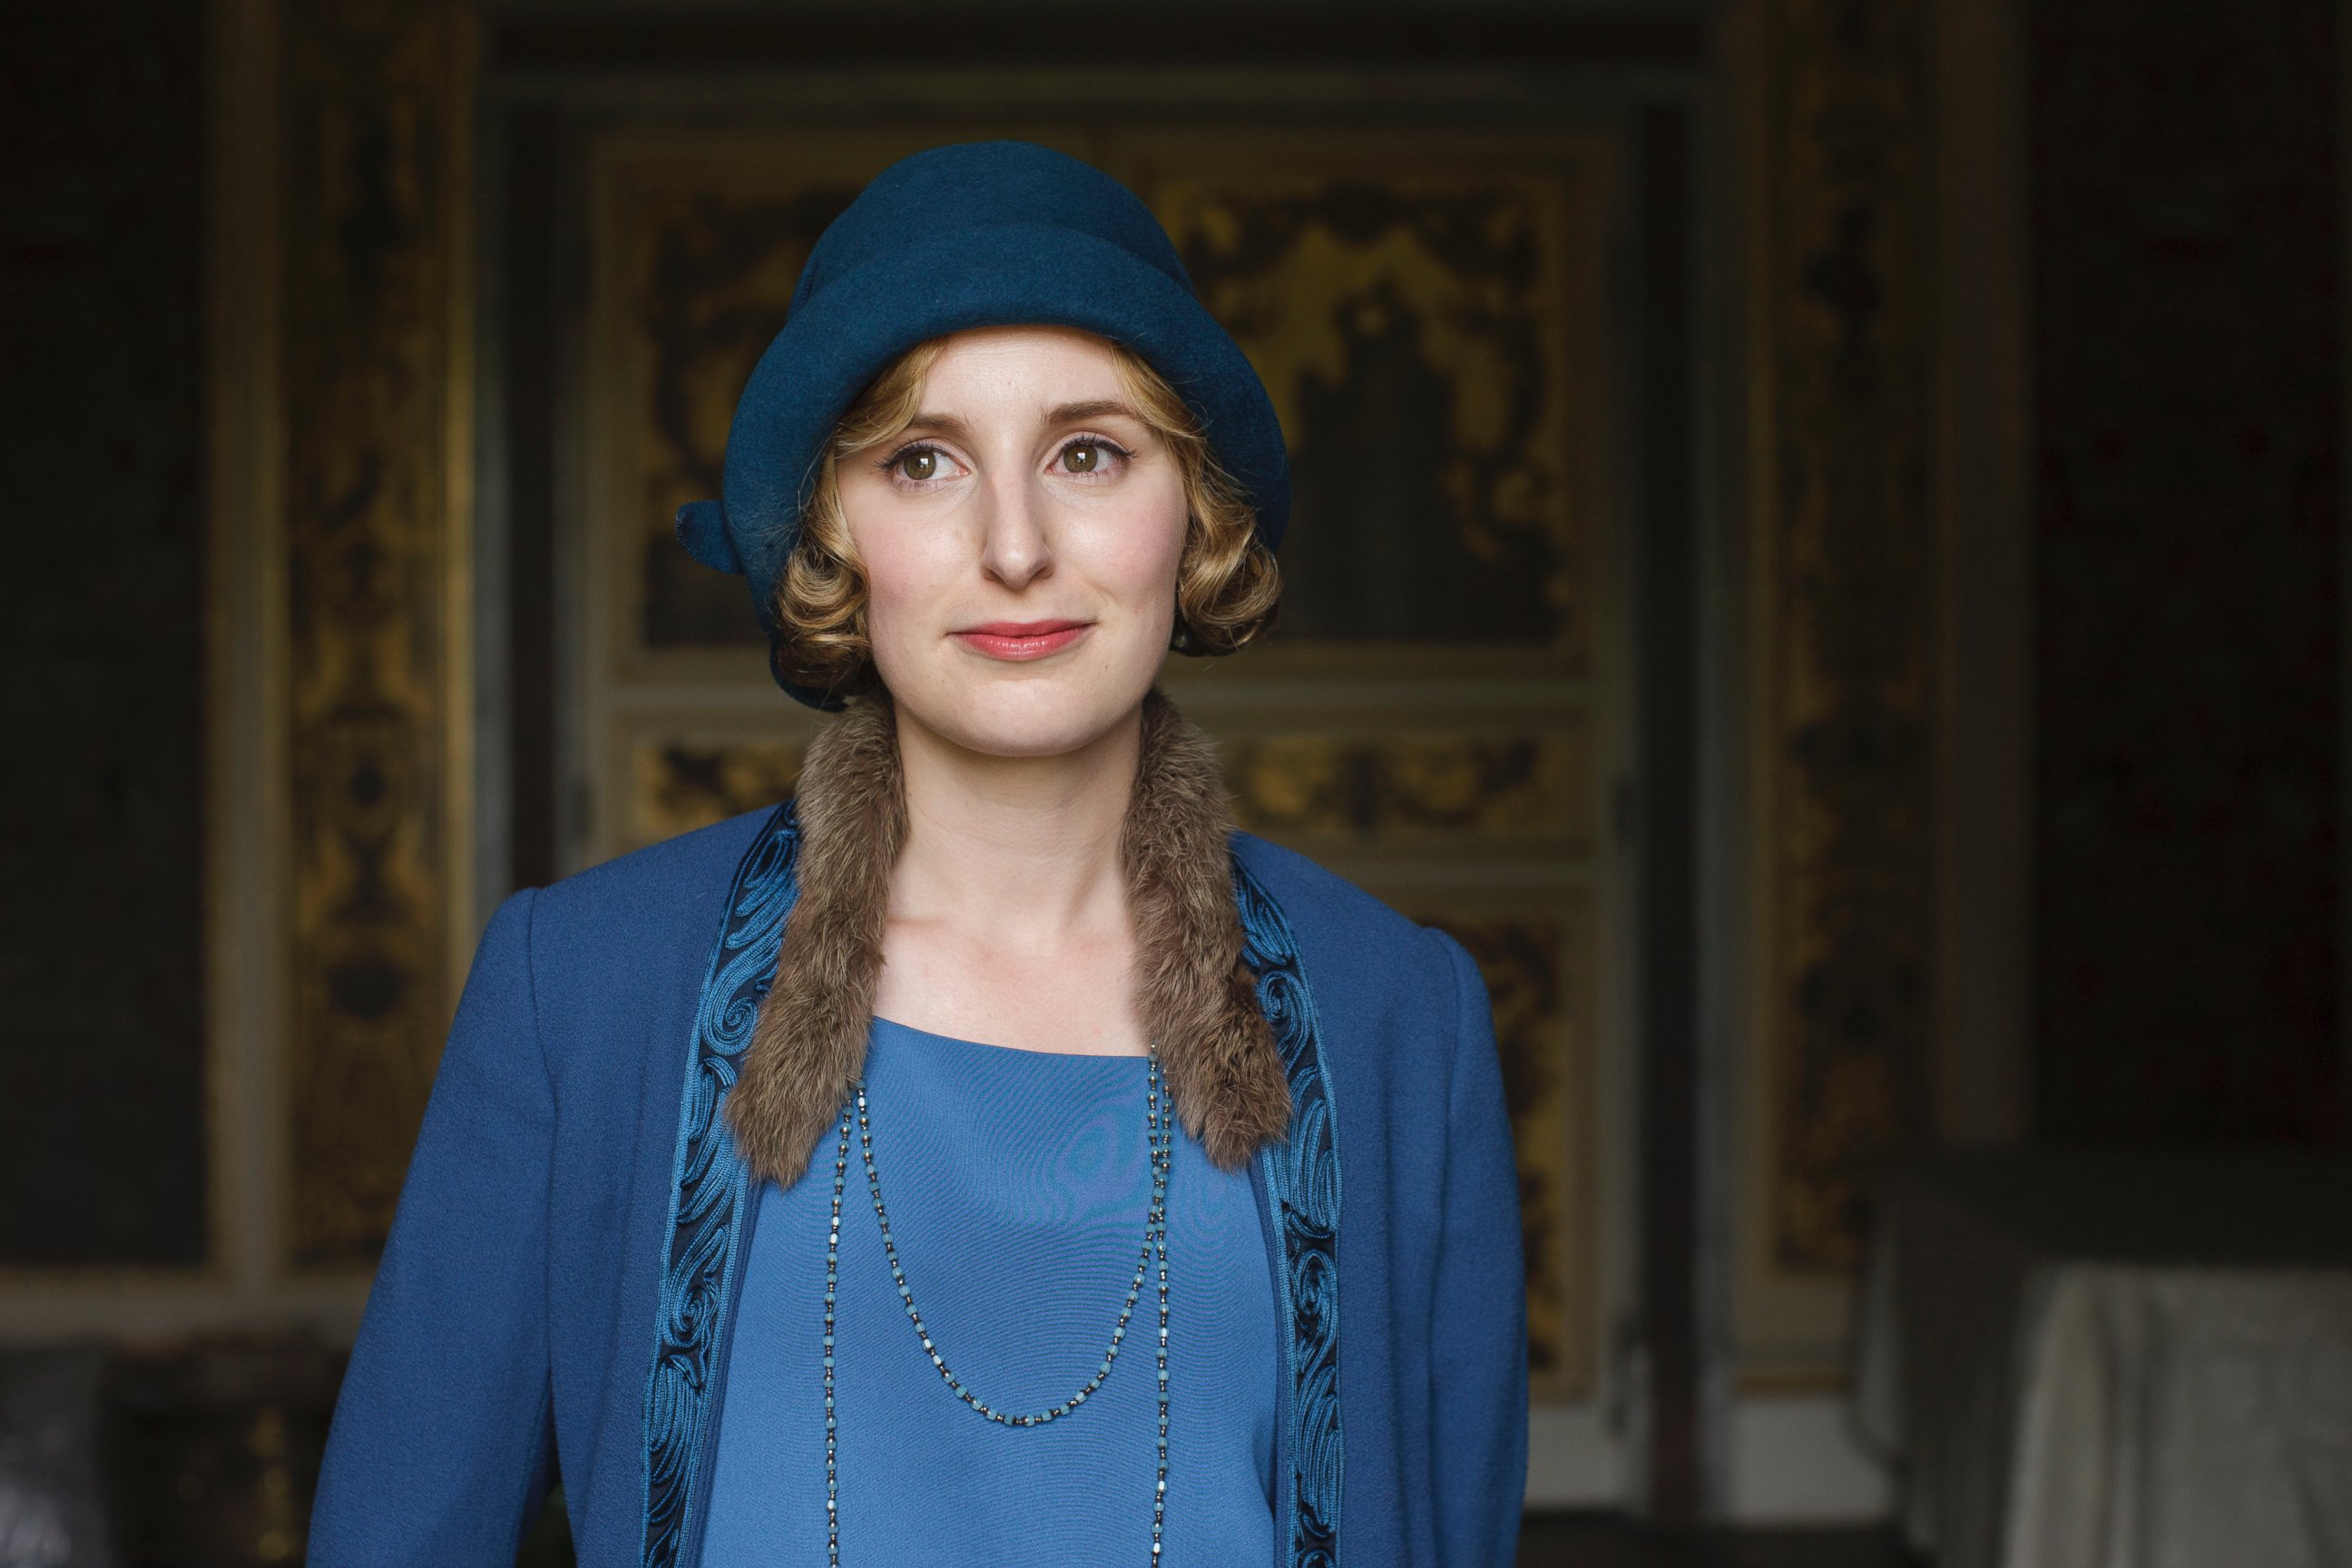 PHOTO: Laura Carmichael as Lady Edith in the series, "Downton Abbey" on March 6, 2016 on MASTERPIECE on PBS.